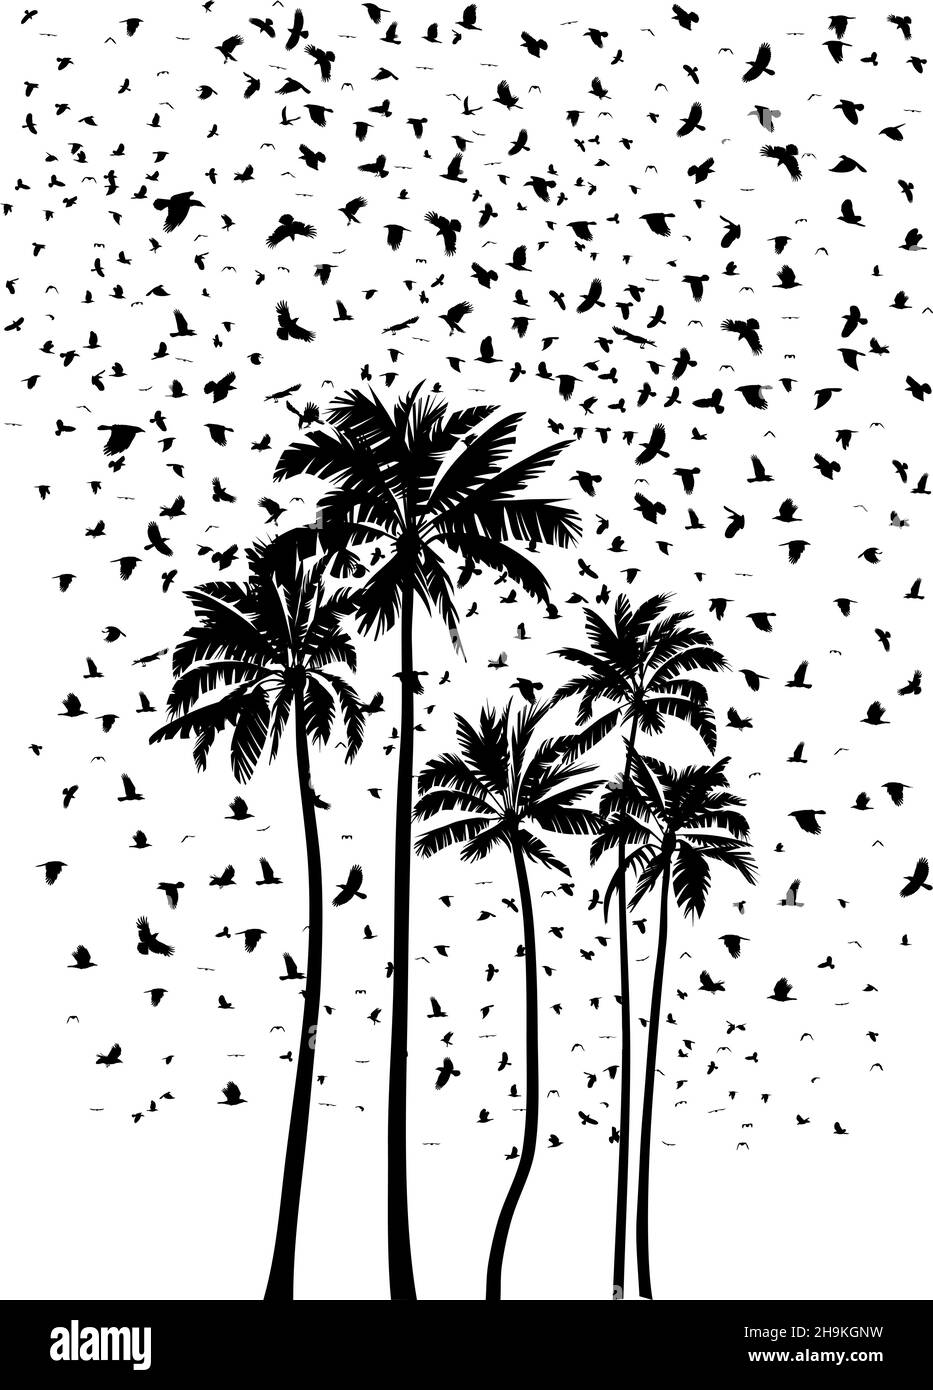 Flock of birds and a group of palm trees Stock Vector